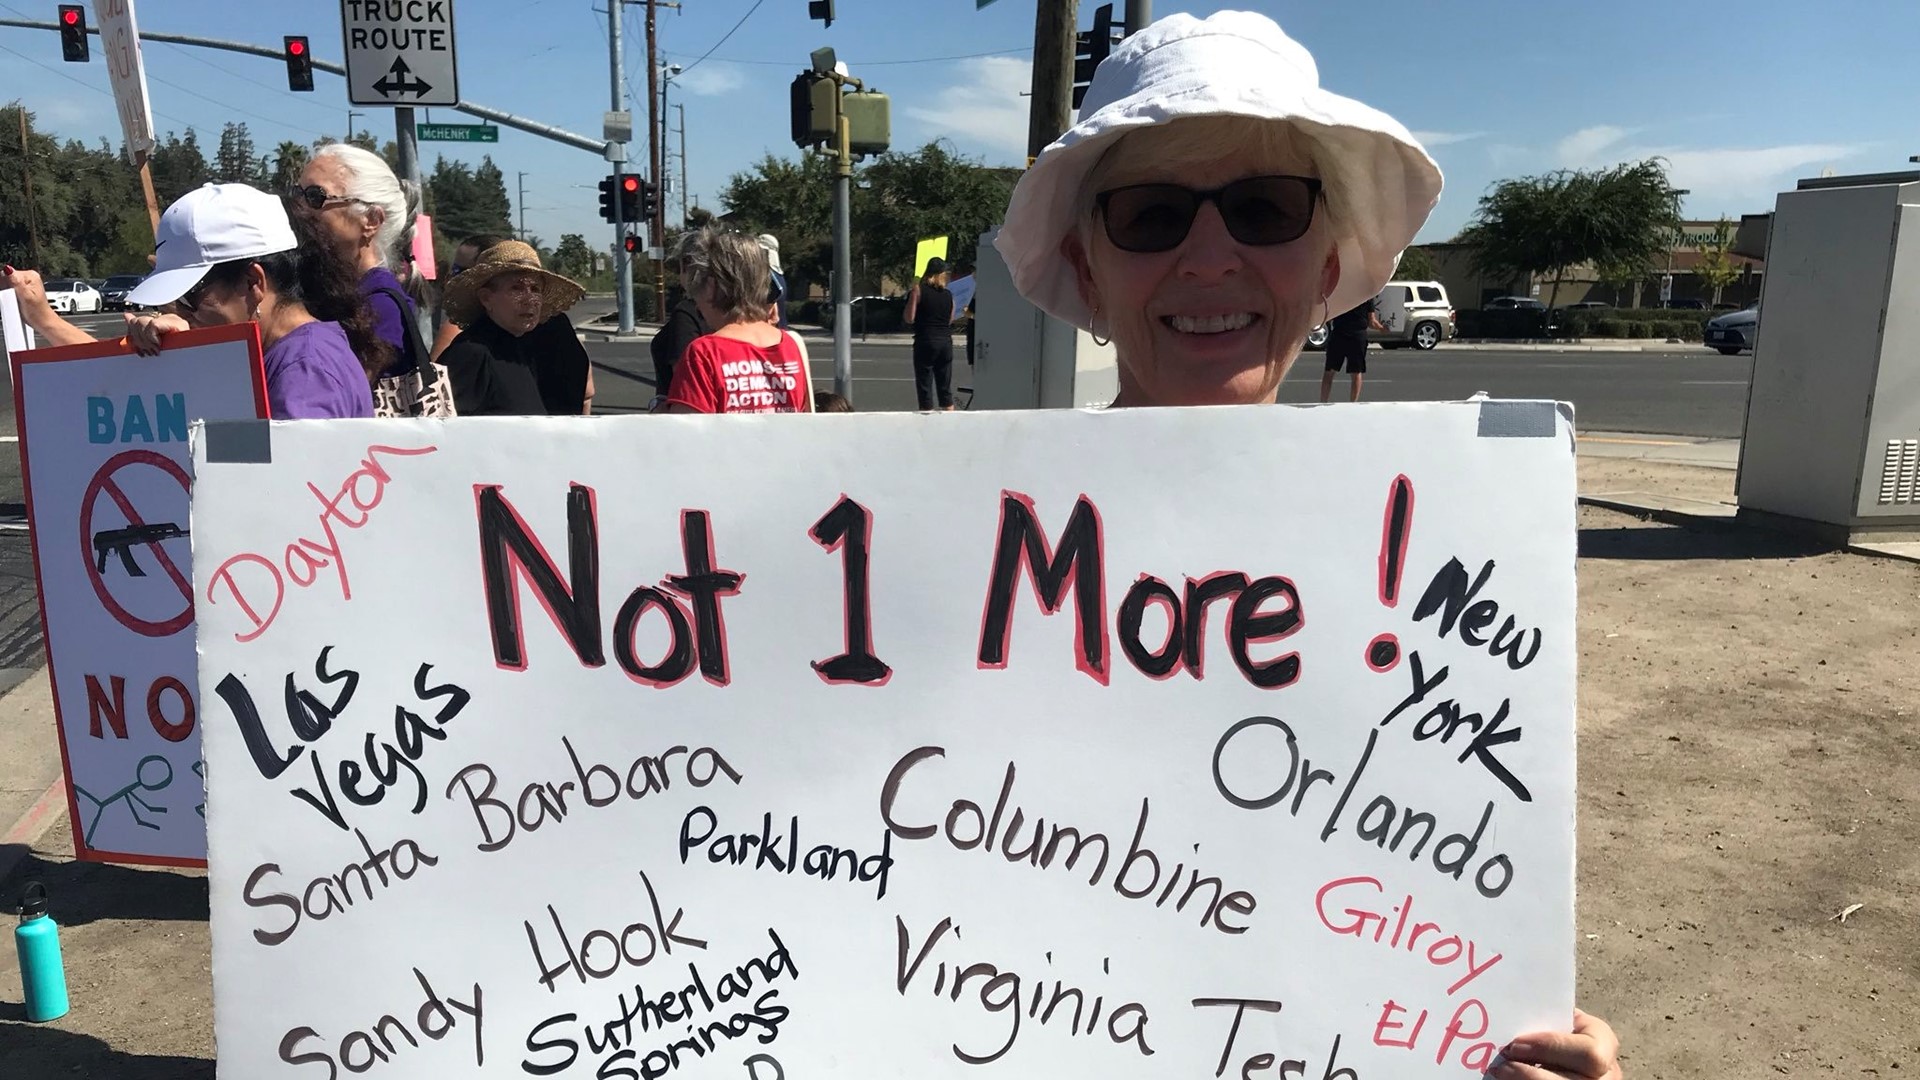 As lawmakers consider a ban on assault weapons, thousands across the country joined a national rally to end gun violence following several mass shootings.